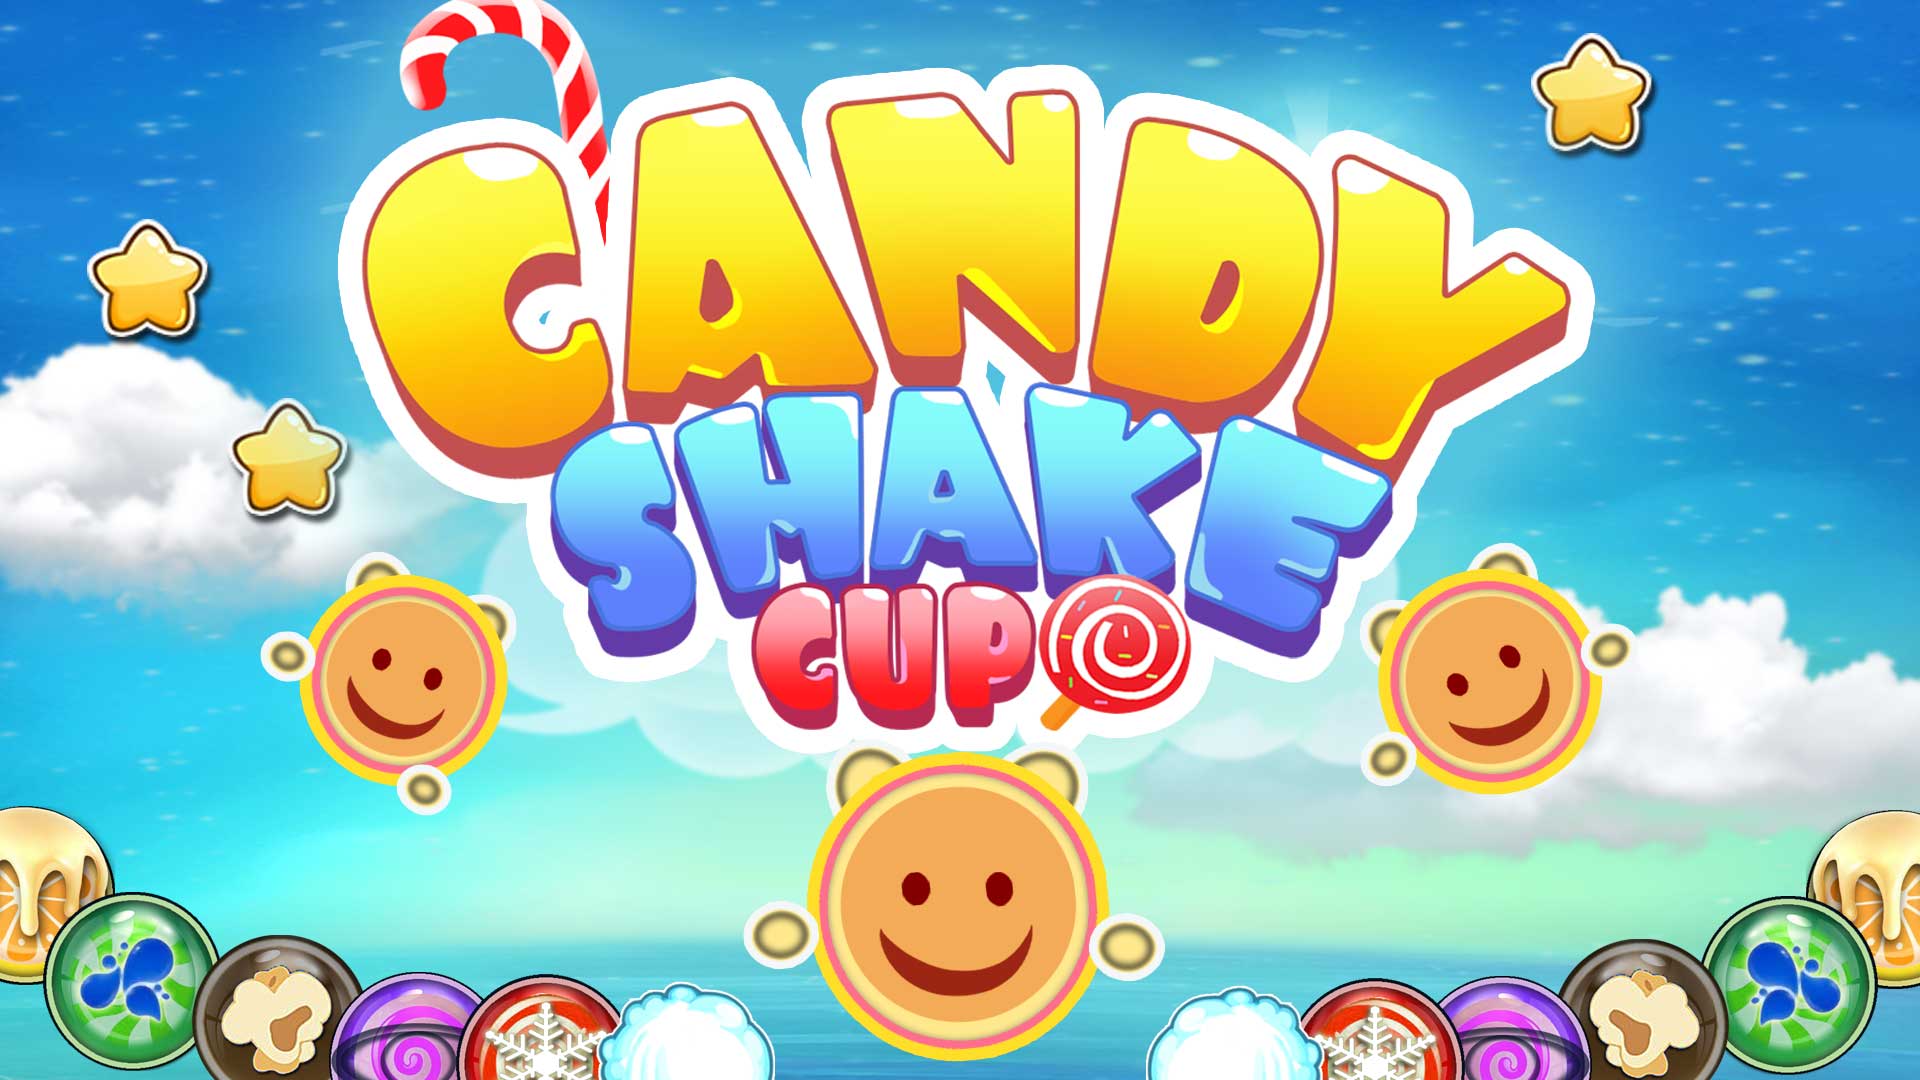 Candy Shake Cup